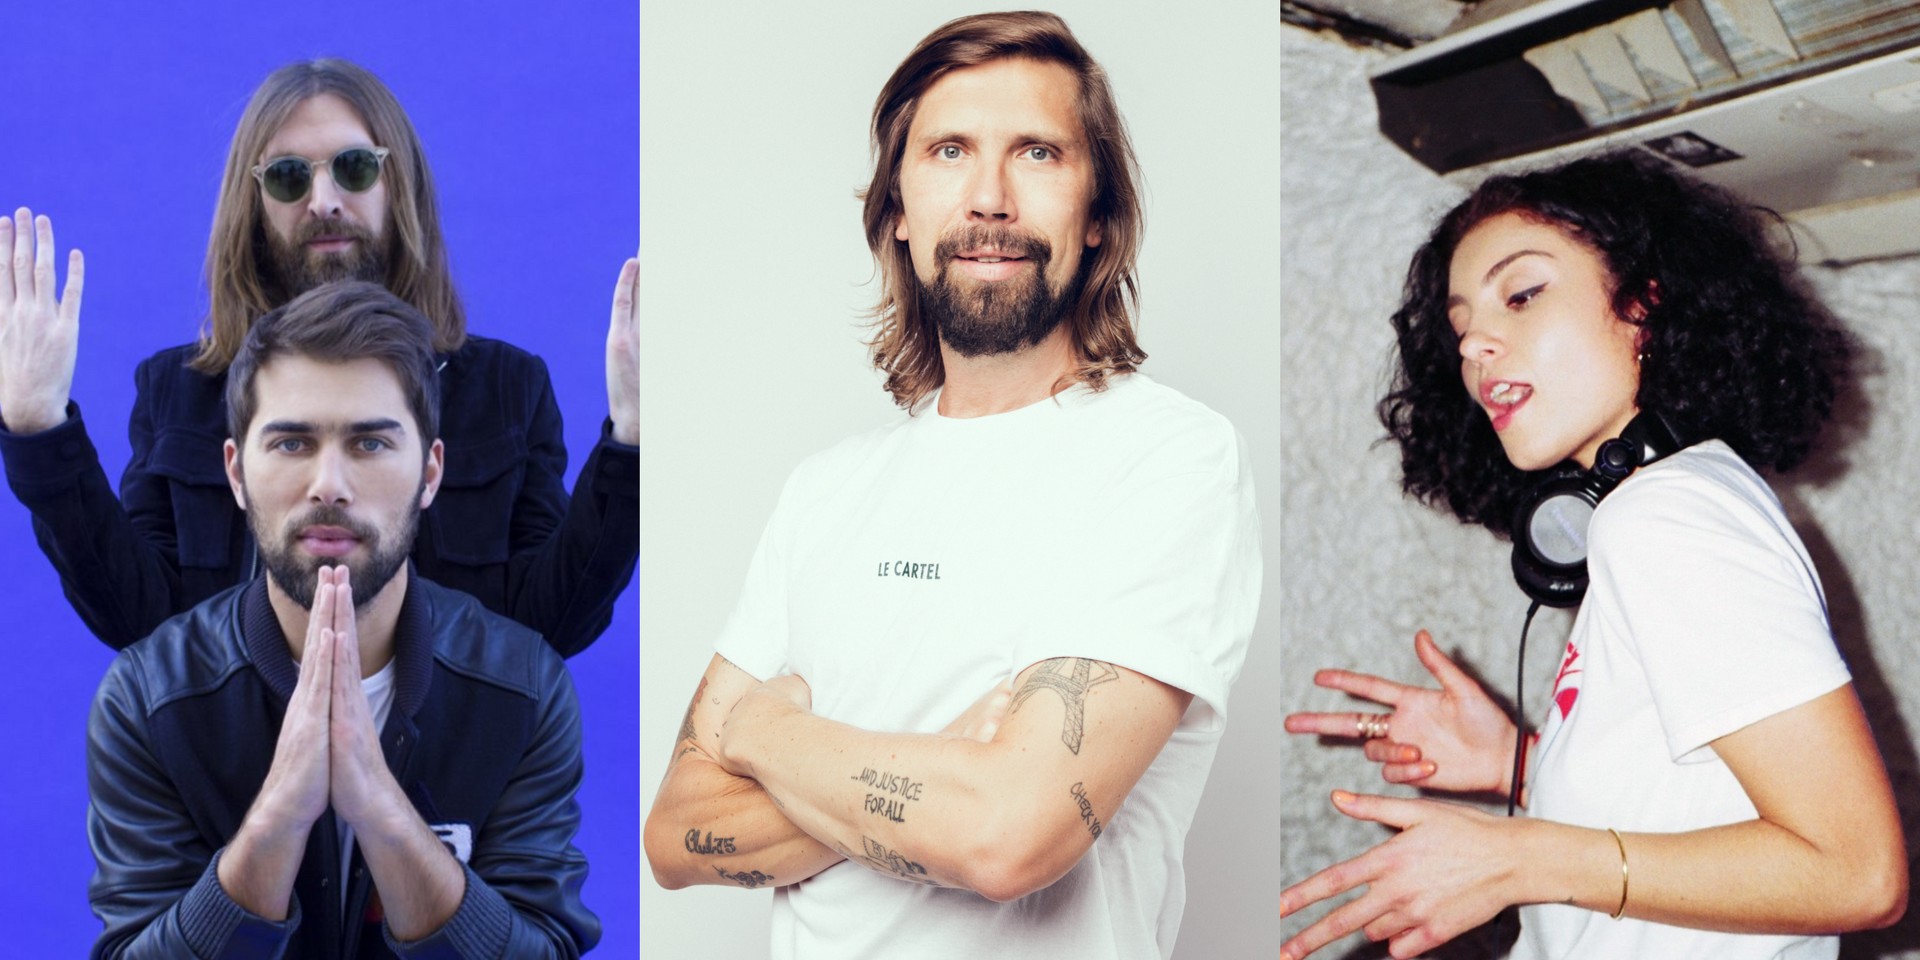 Collective Minds announces Ed Banger Takeover featuring Busy P, Breakbot & Irfane, YASMIN and more at Zouk Singapore this December 